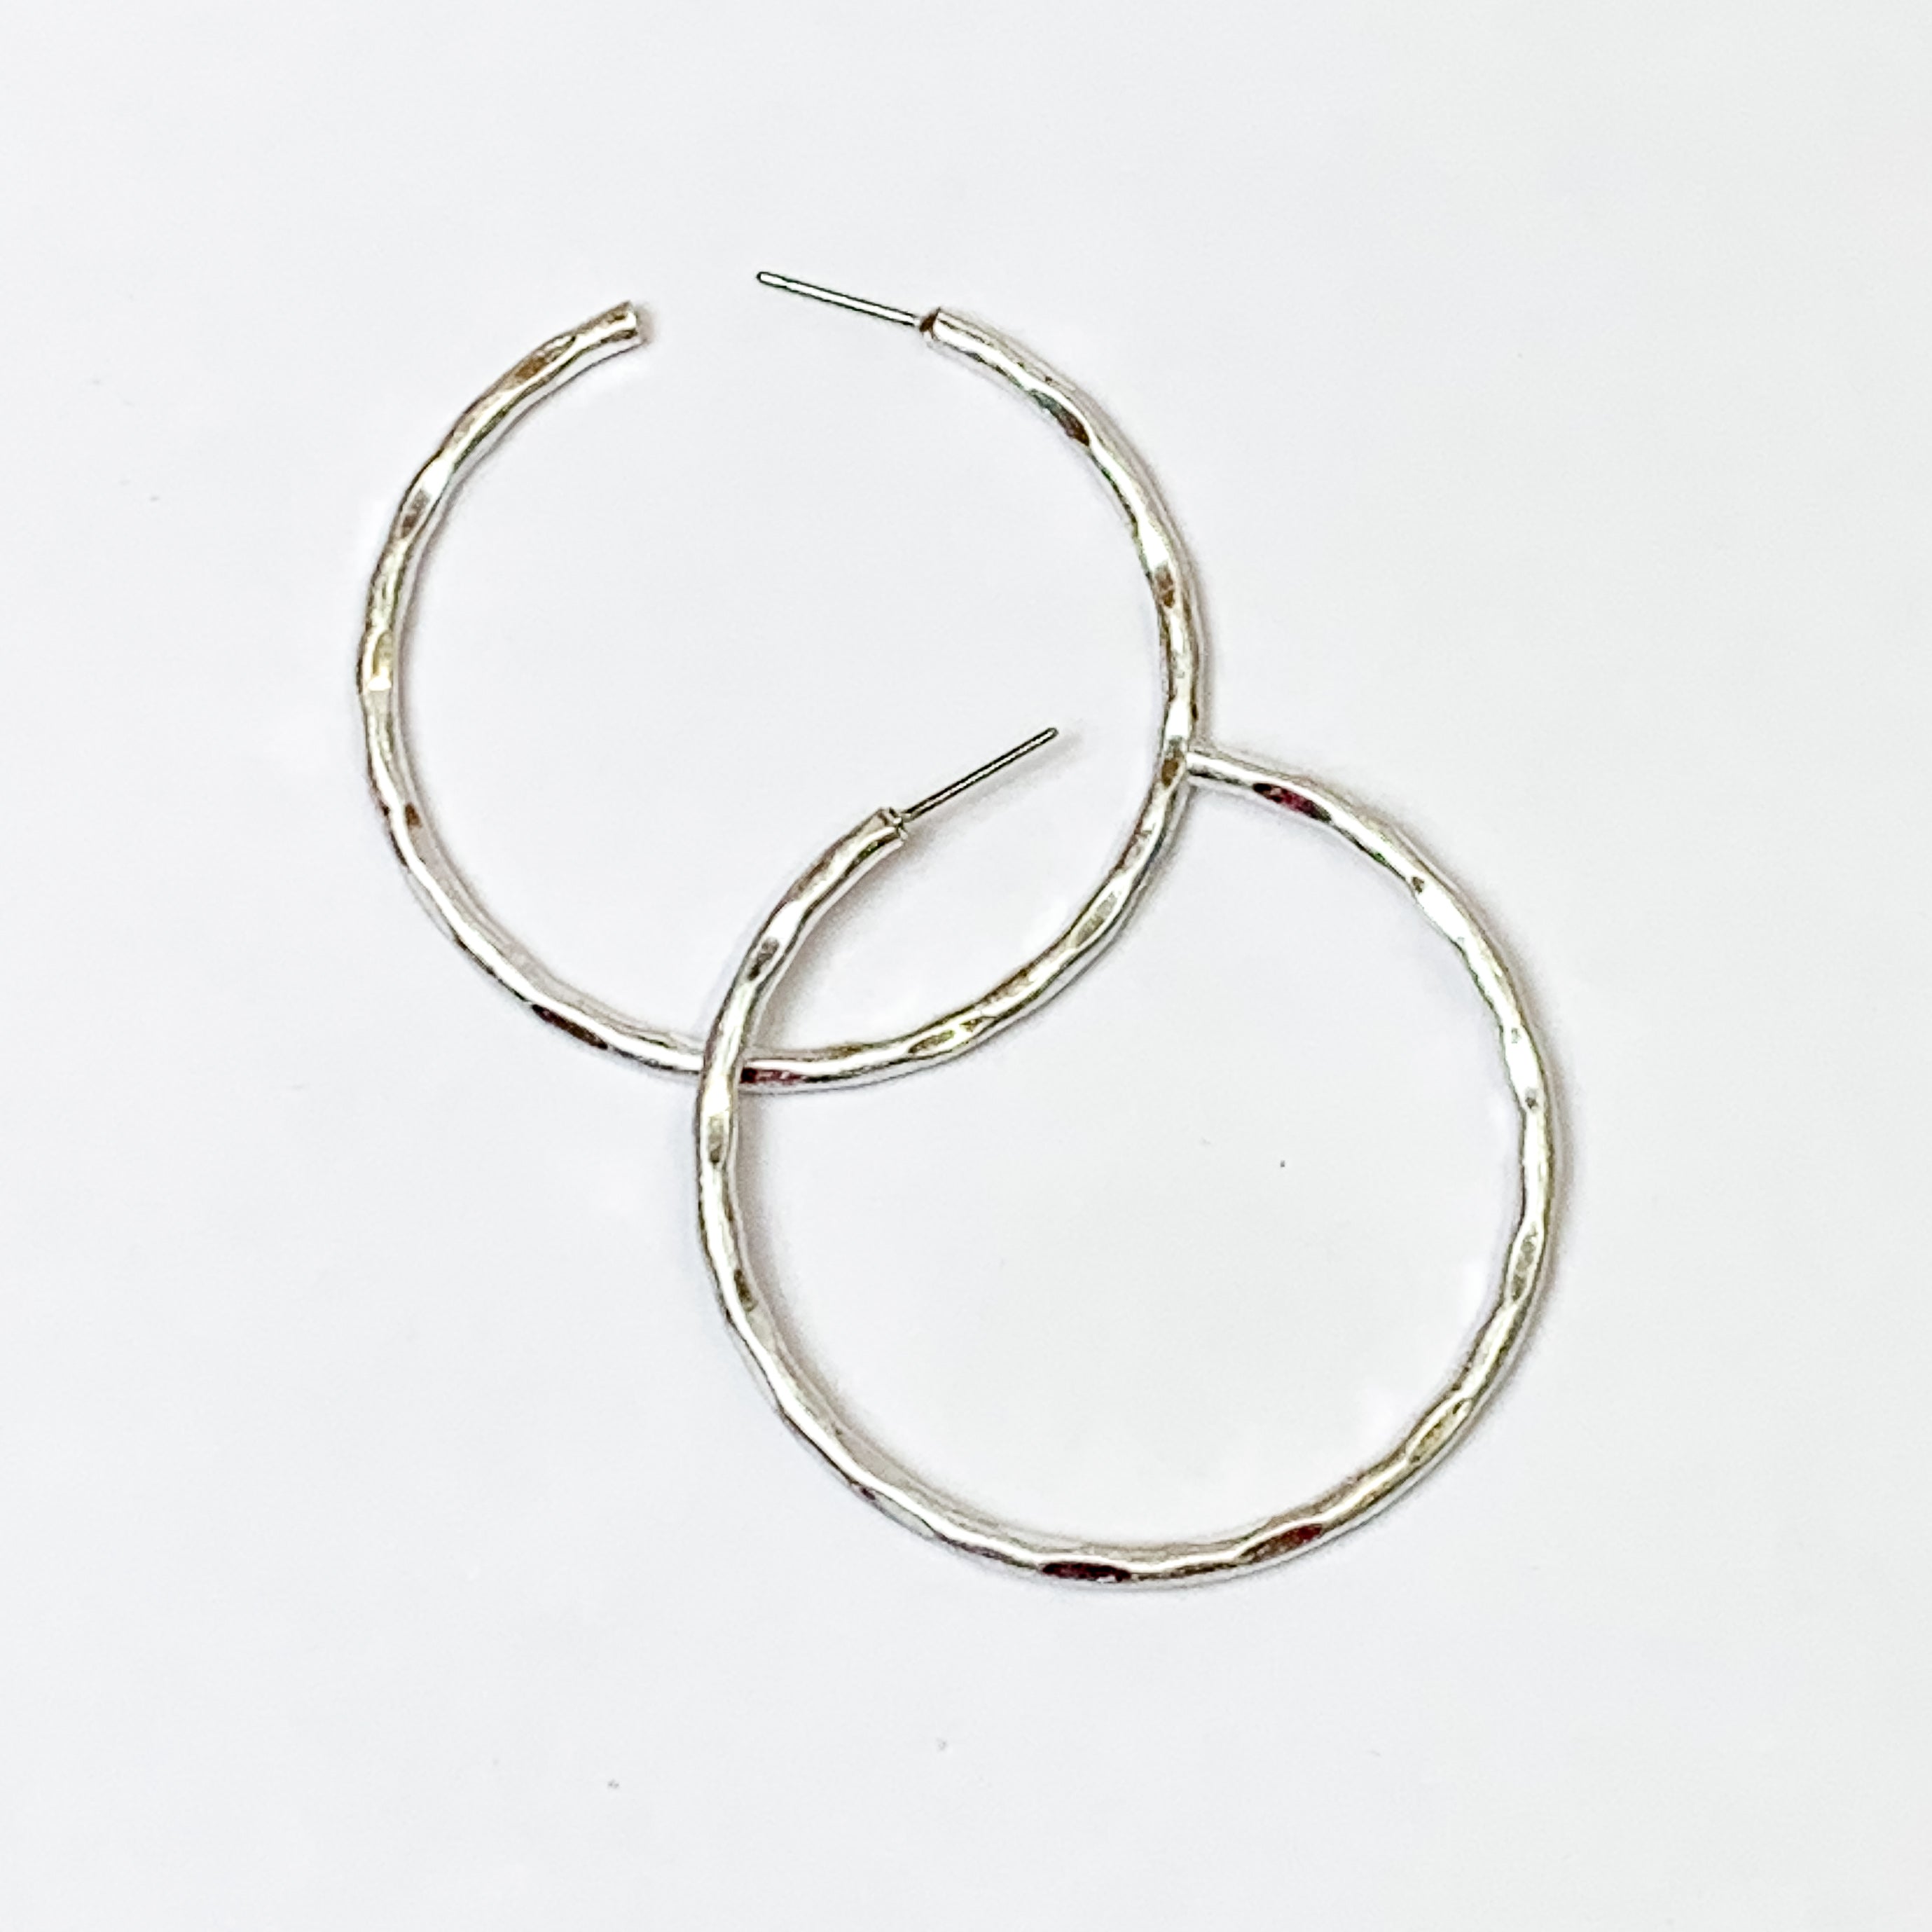 Medium Hammered Hoops in Silver Tone - Giddy Up Glamour Boutique